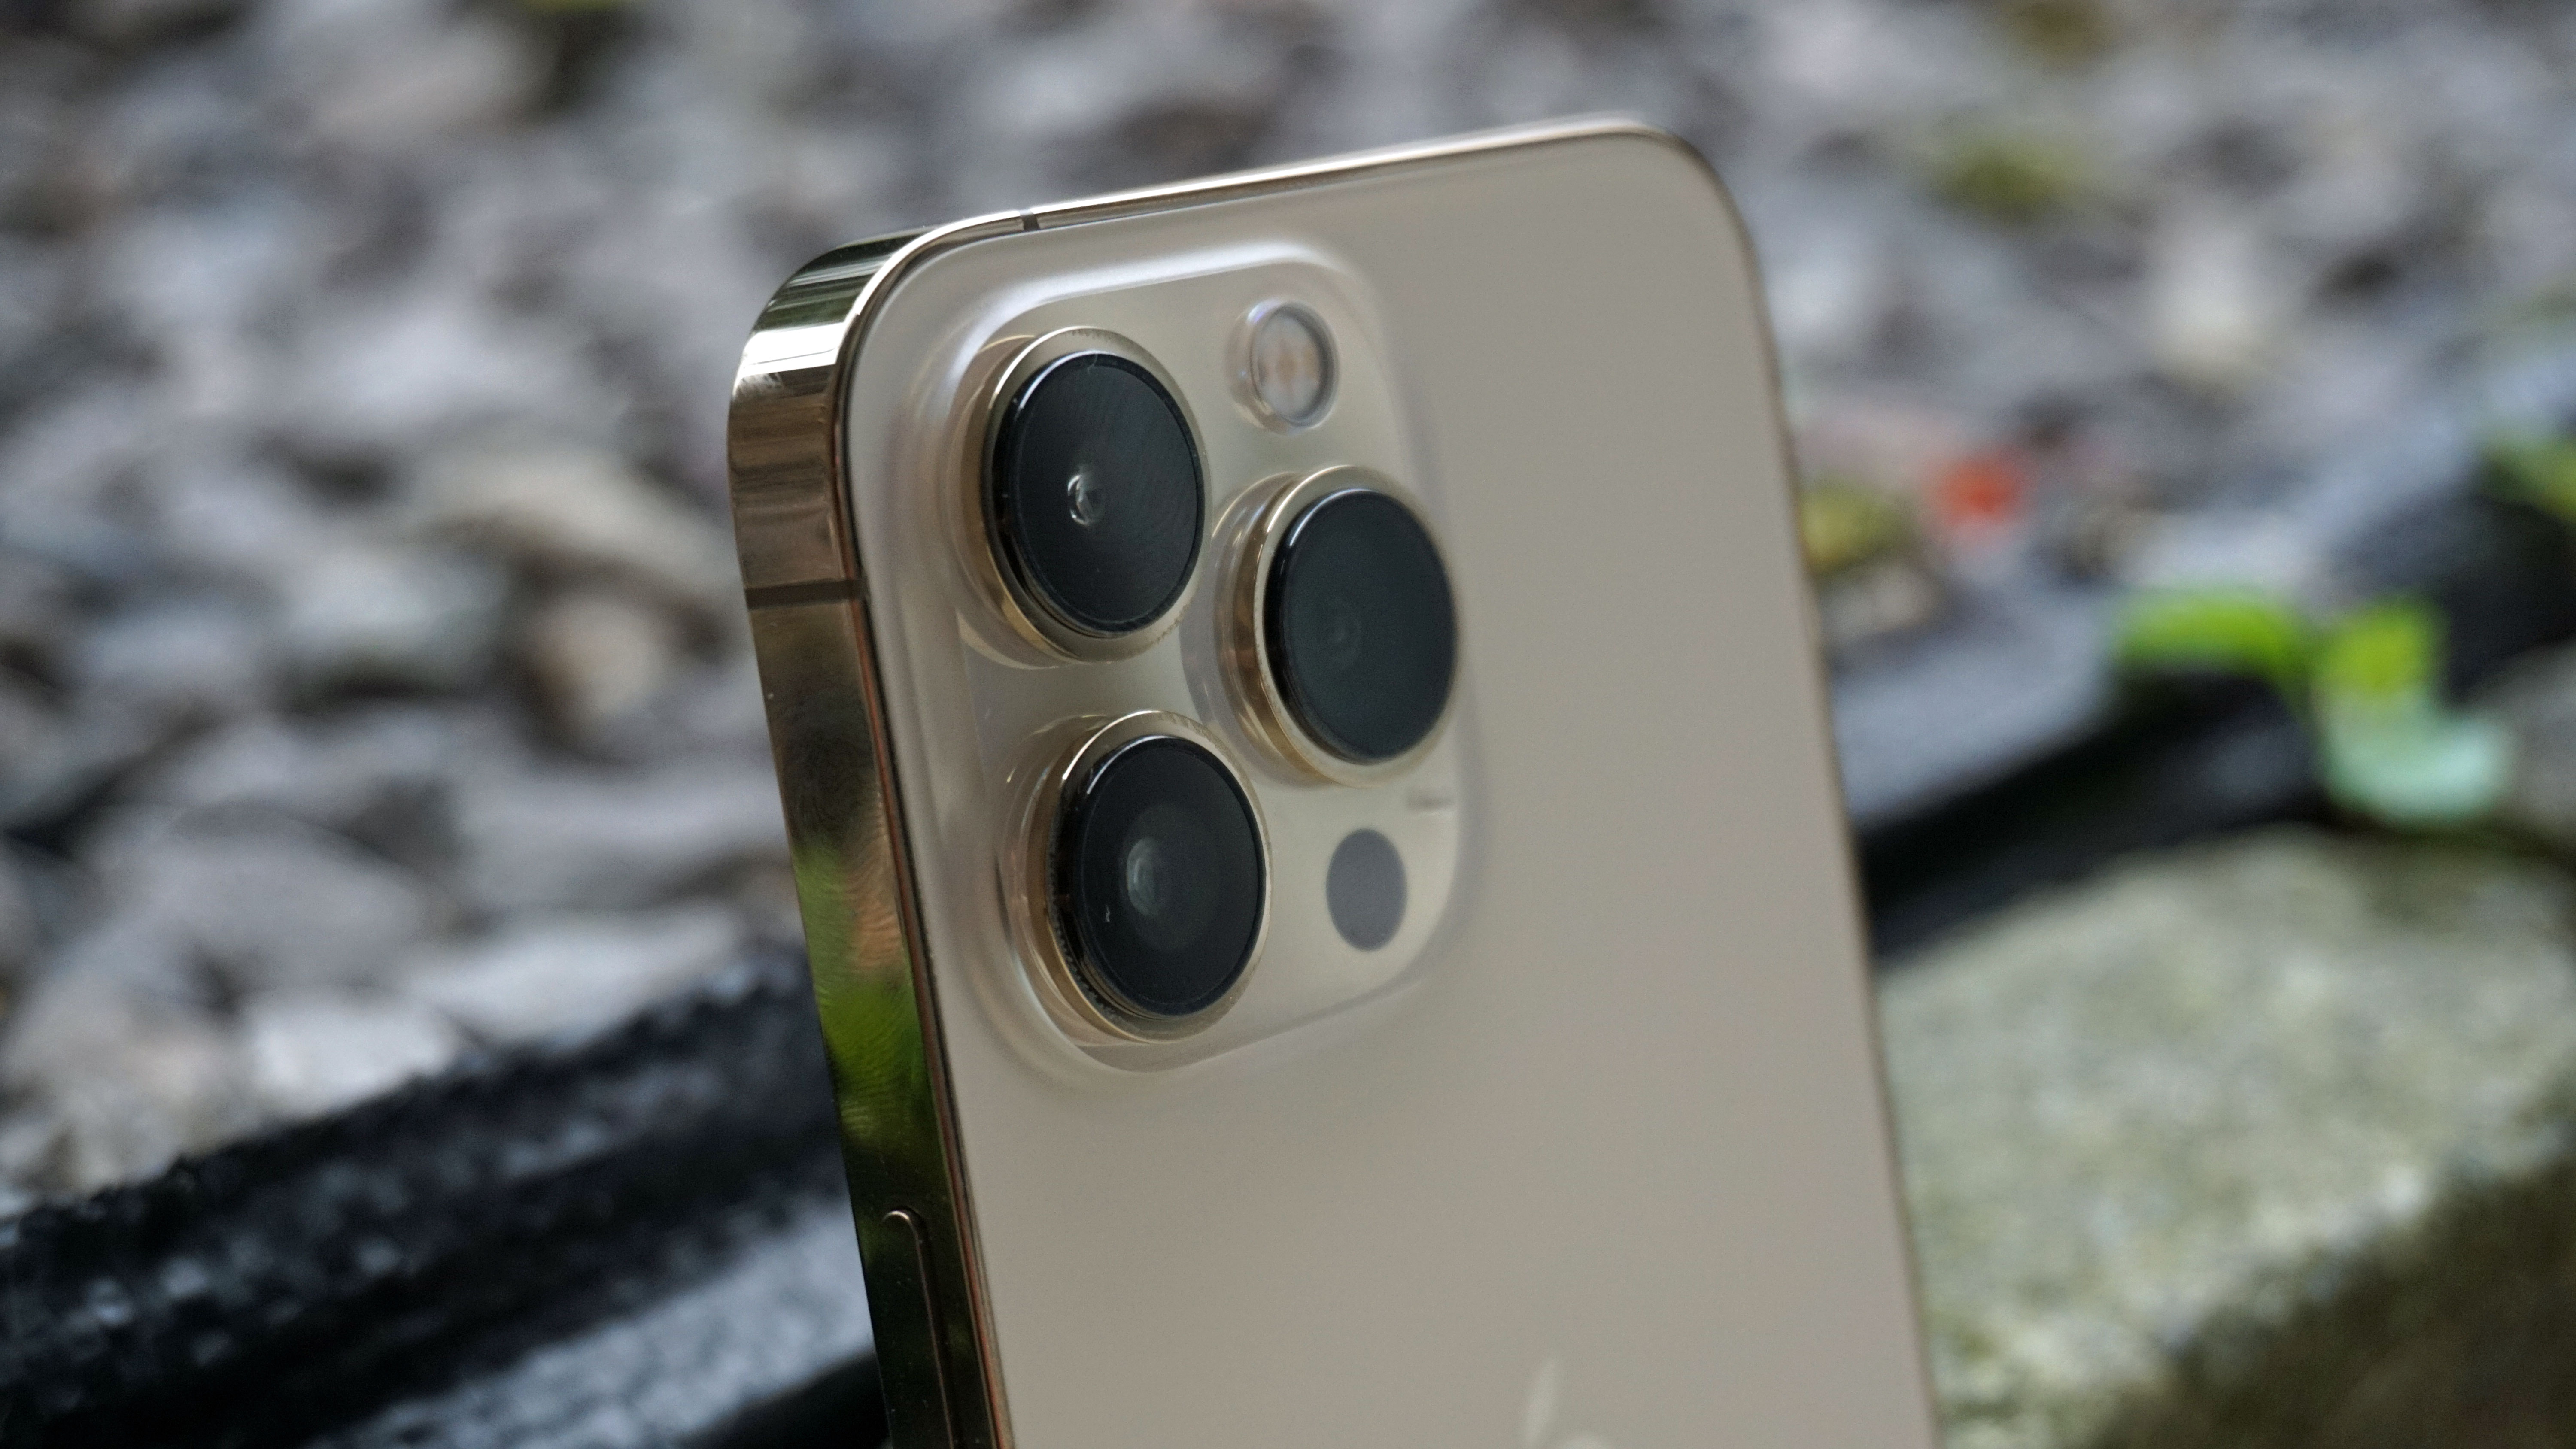 iPhone 15 Pro likely to have the biggest camera upgrade we’ve seen in years